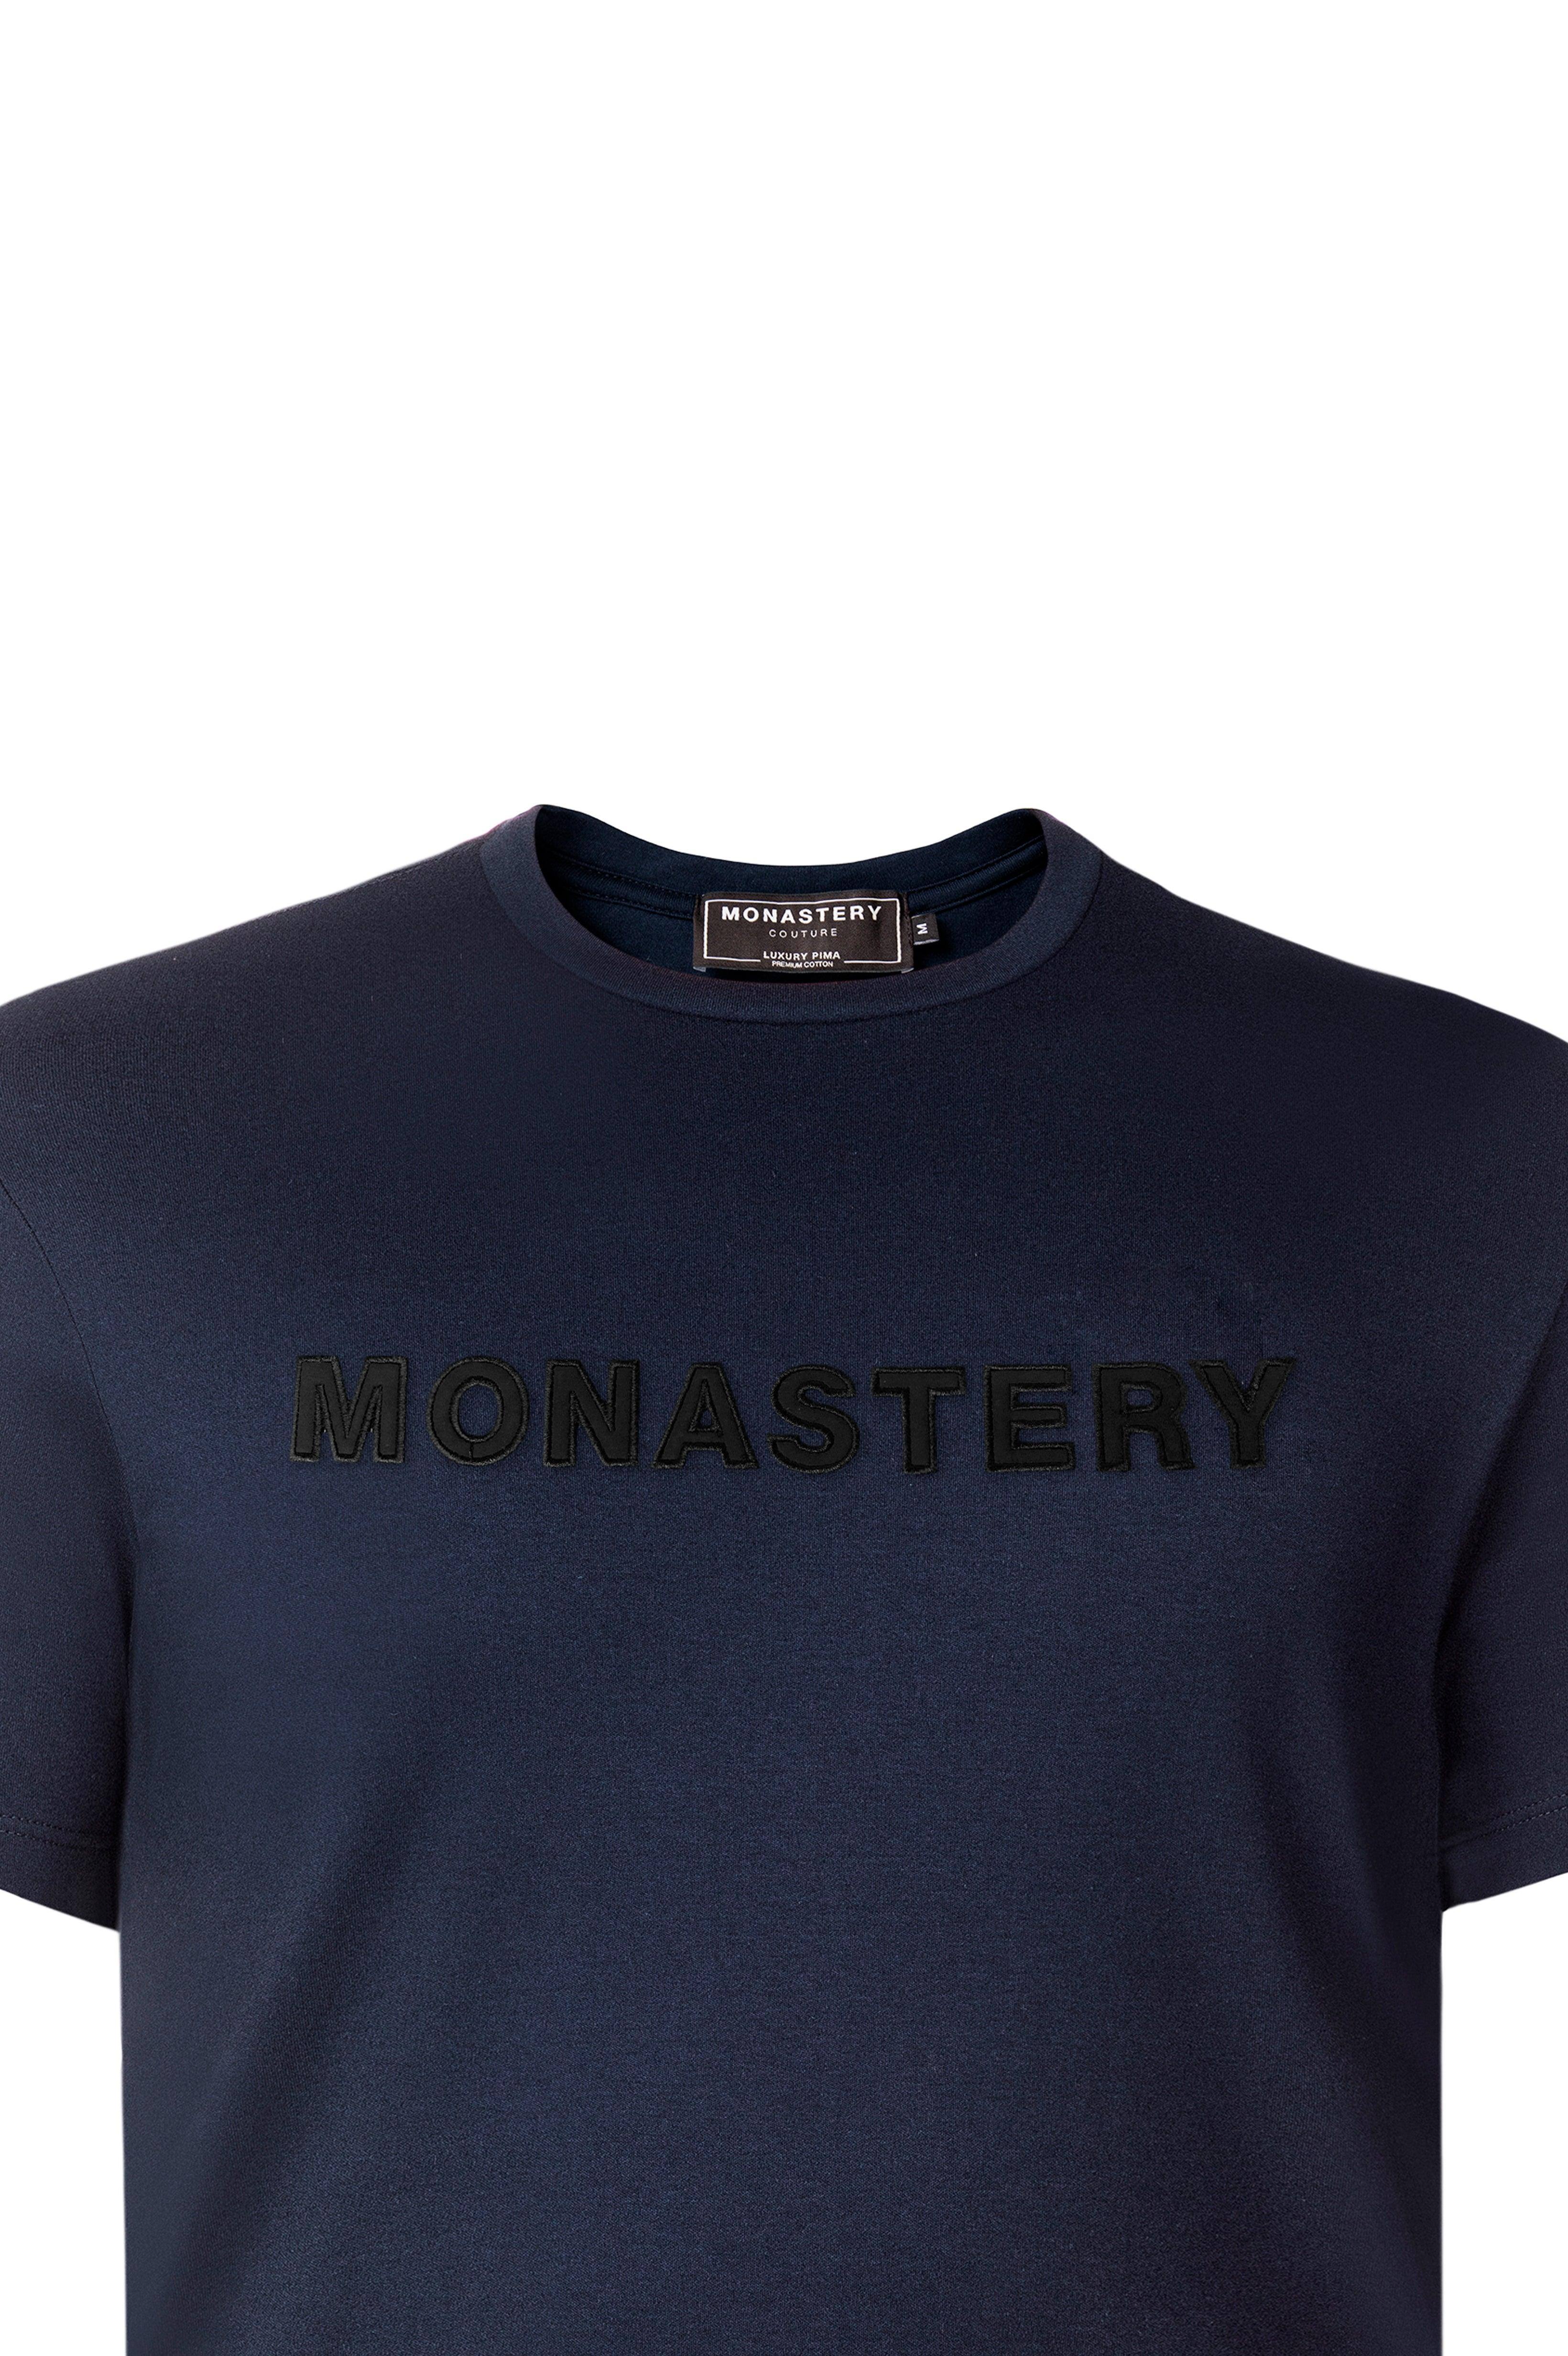 CYRO T-SHIRT NAVY | Monastery Couture